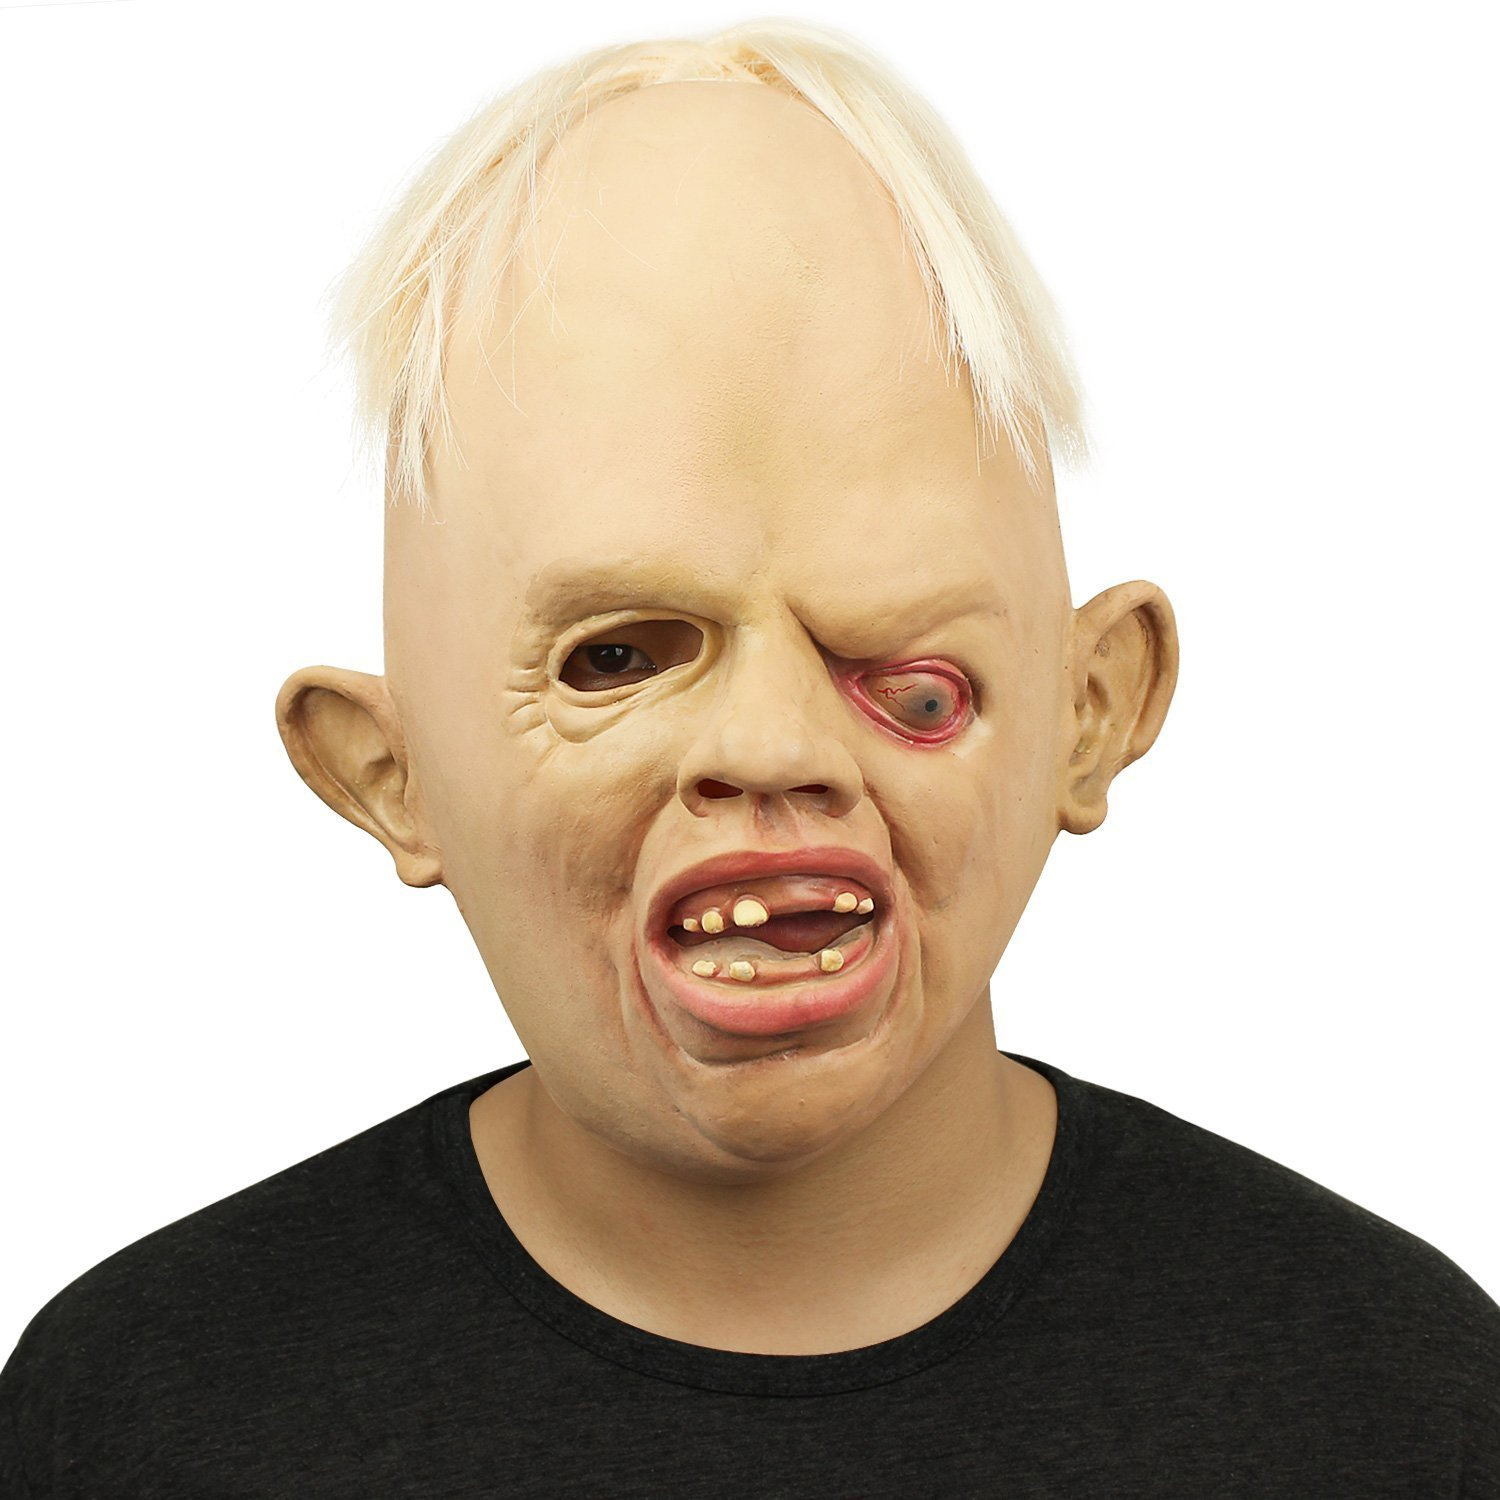 Rubber Creepy Scary Ugly Baby Halloween Mask - The Smart Shop